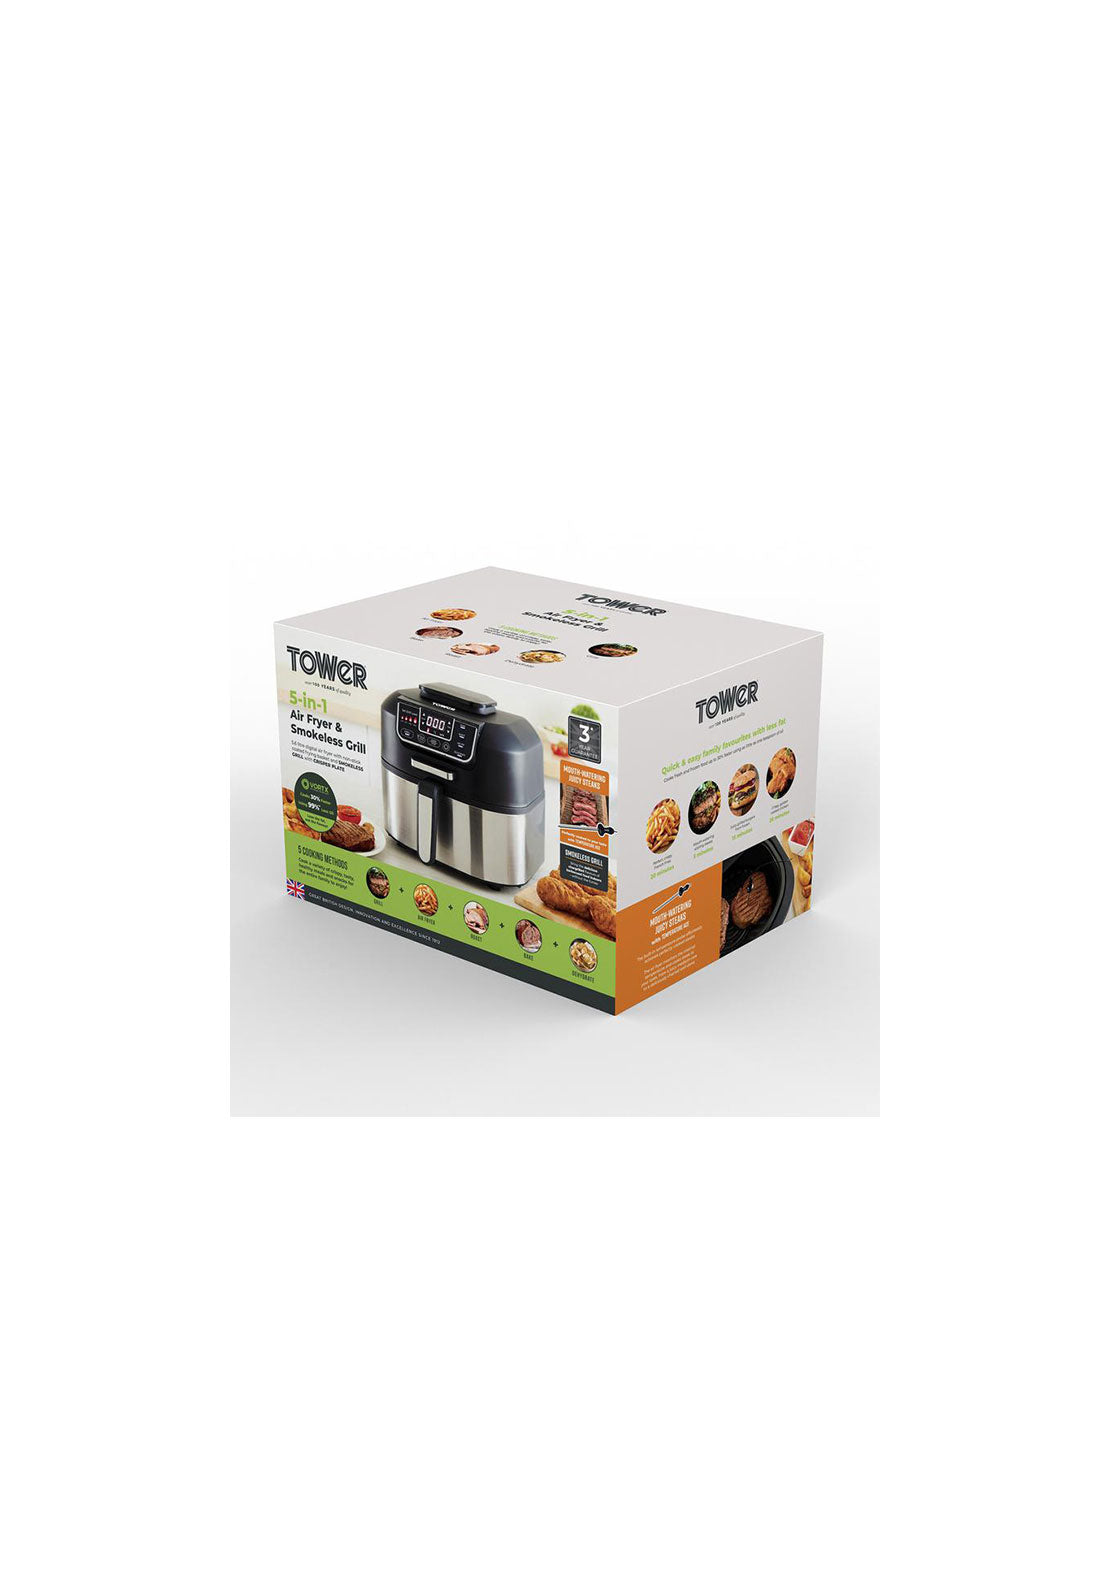 Tower 5.6L 5 In 1 Vortx 5.6L Air Fryer and Grill with Crisper | T17086 2 Shaws Department Stores